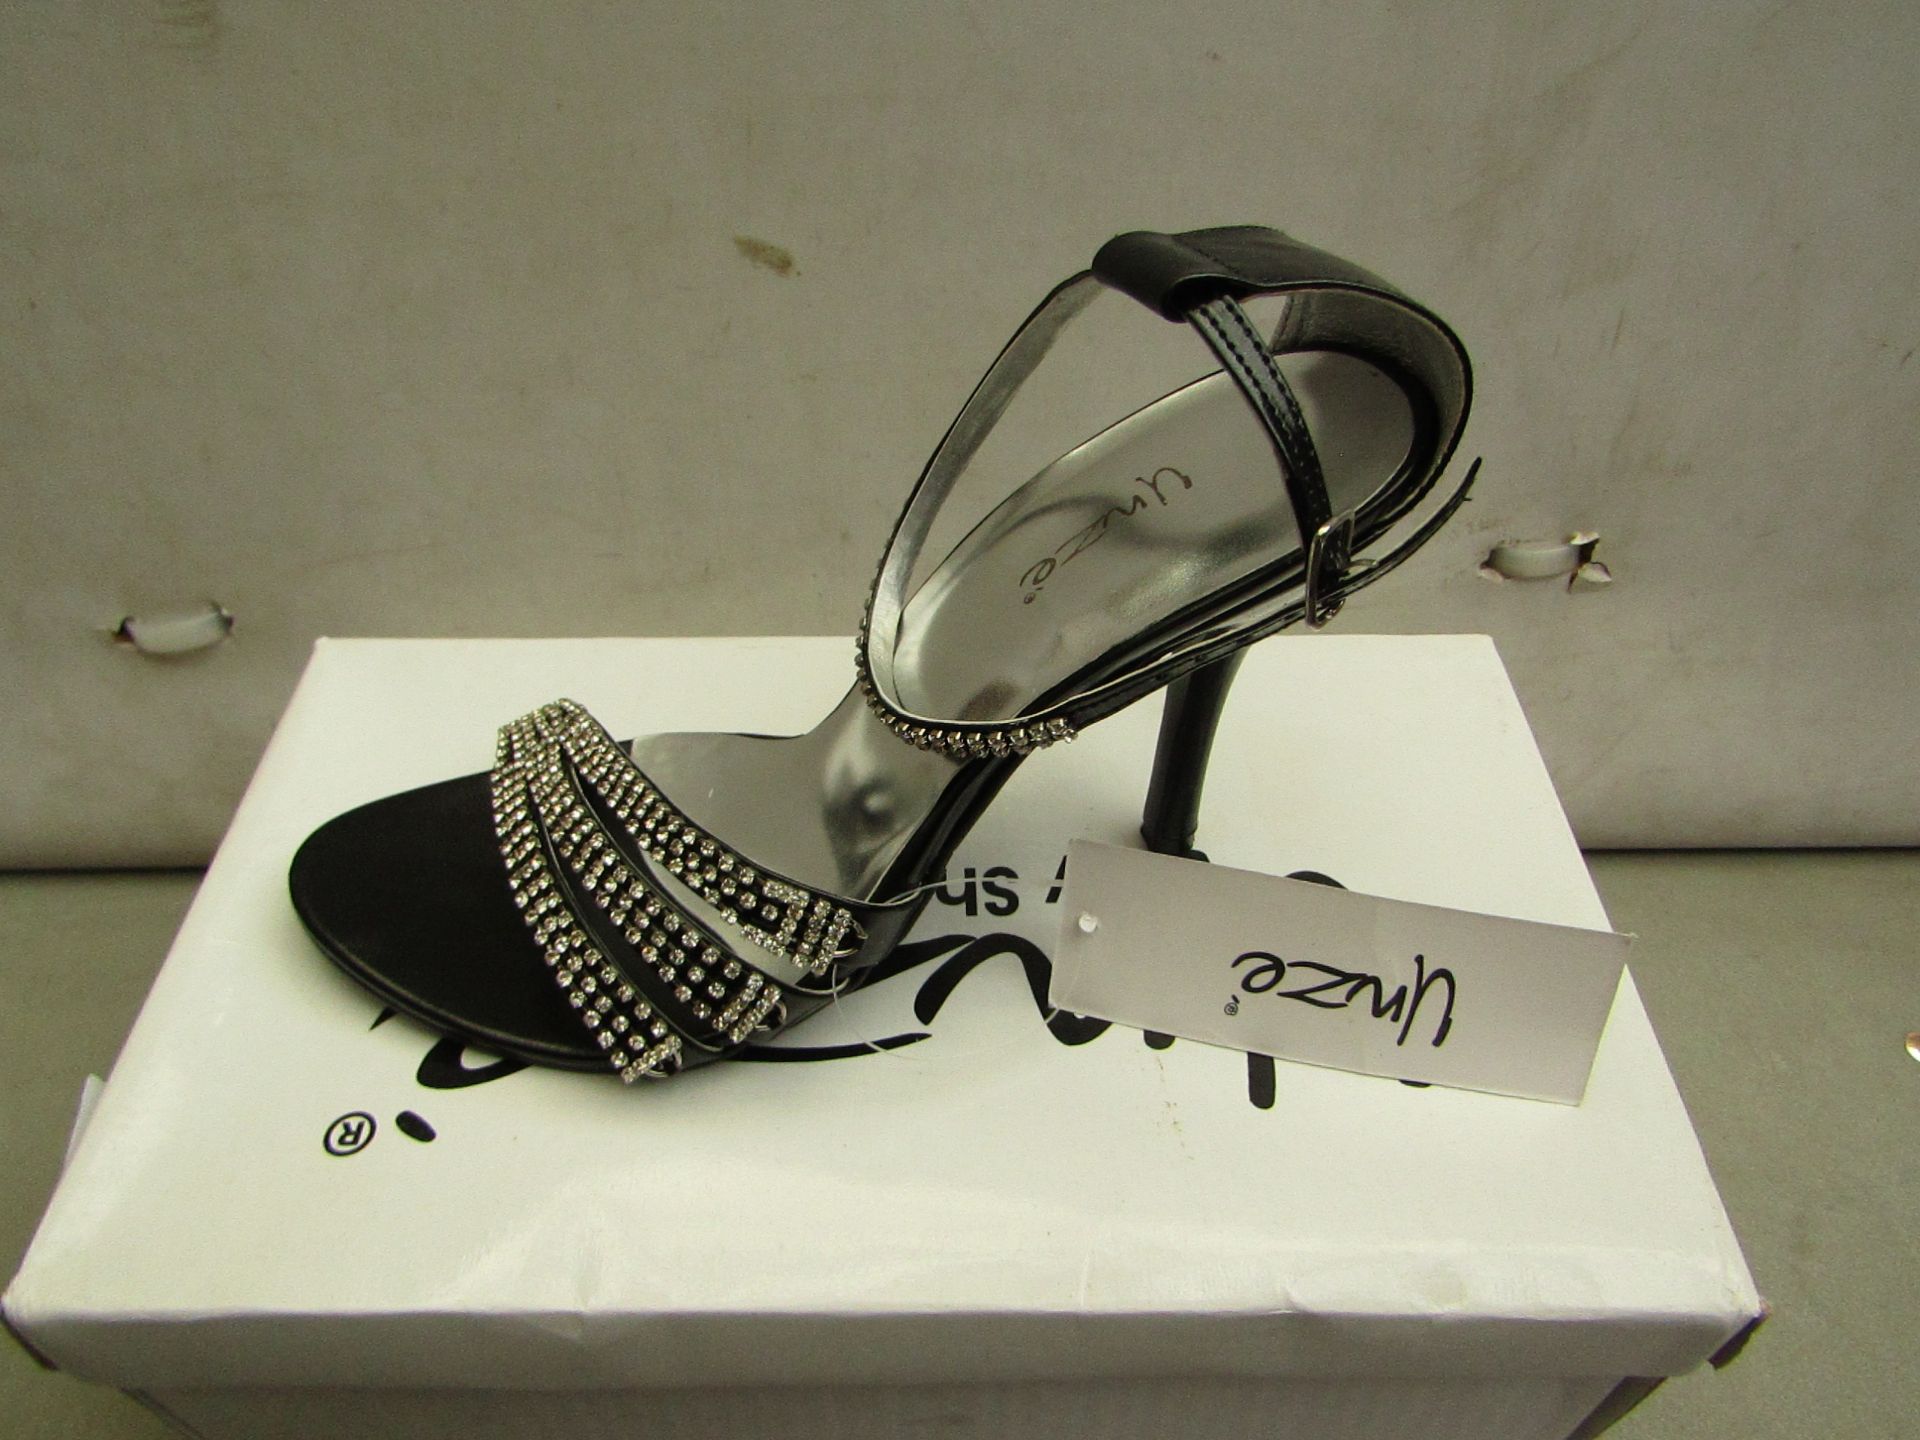 Unze by Shalamar Size 8 Ladies Shoes. New & boxed see image for design